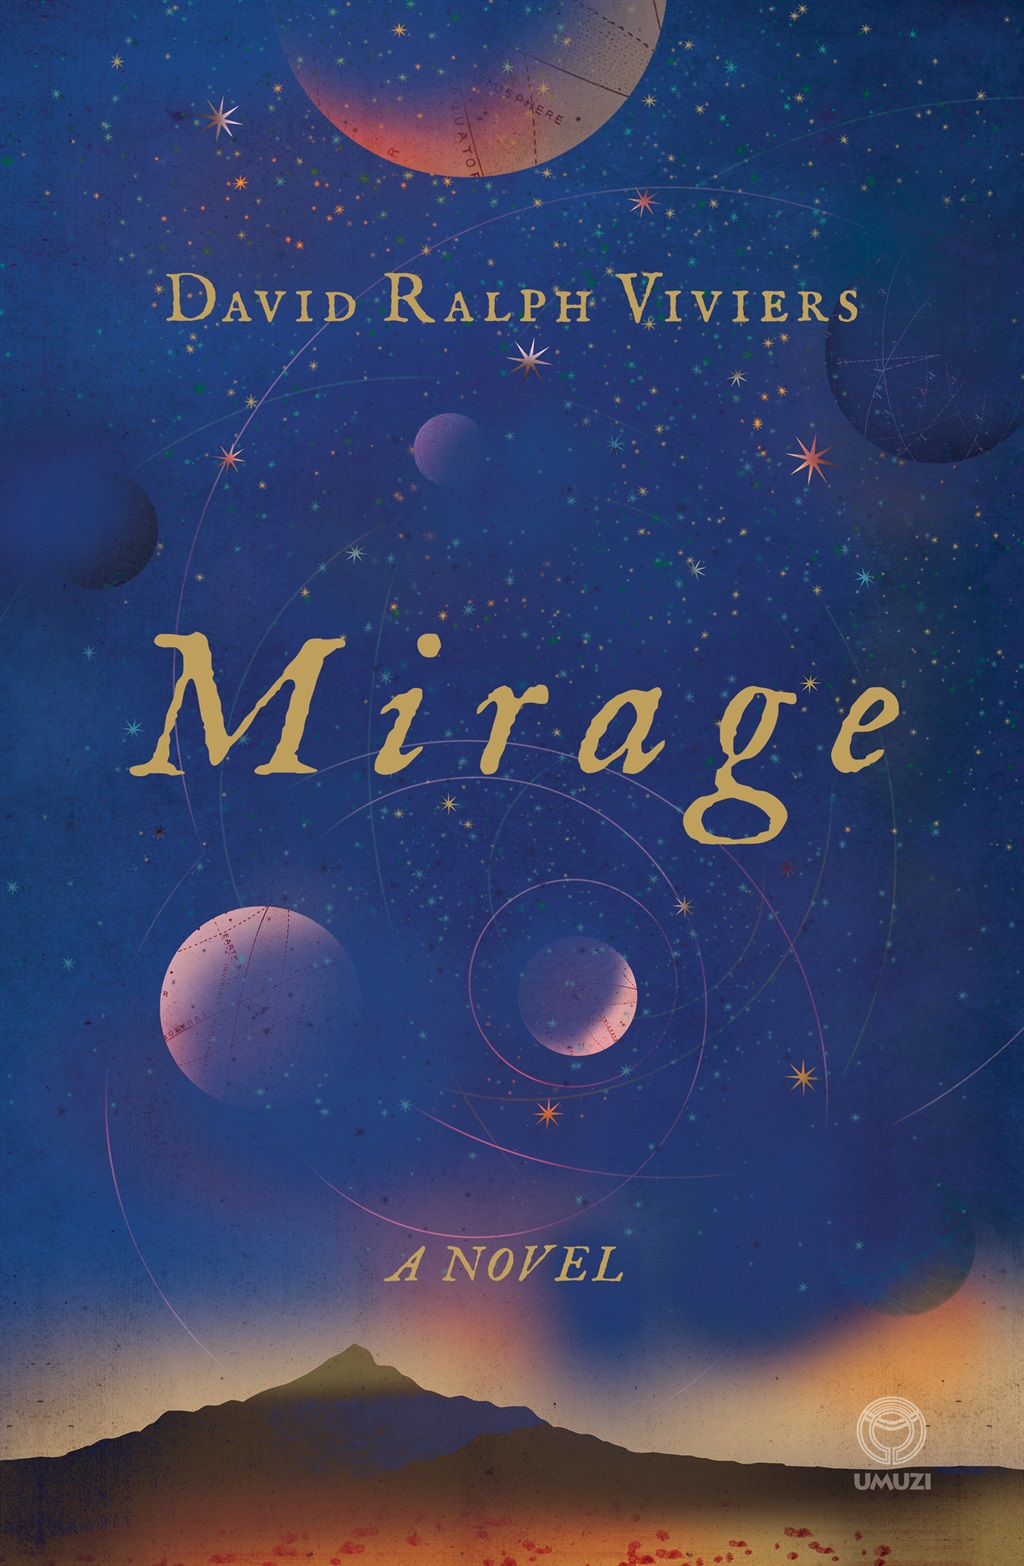 The cover of the book Mirage by David Ralph Vivier